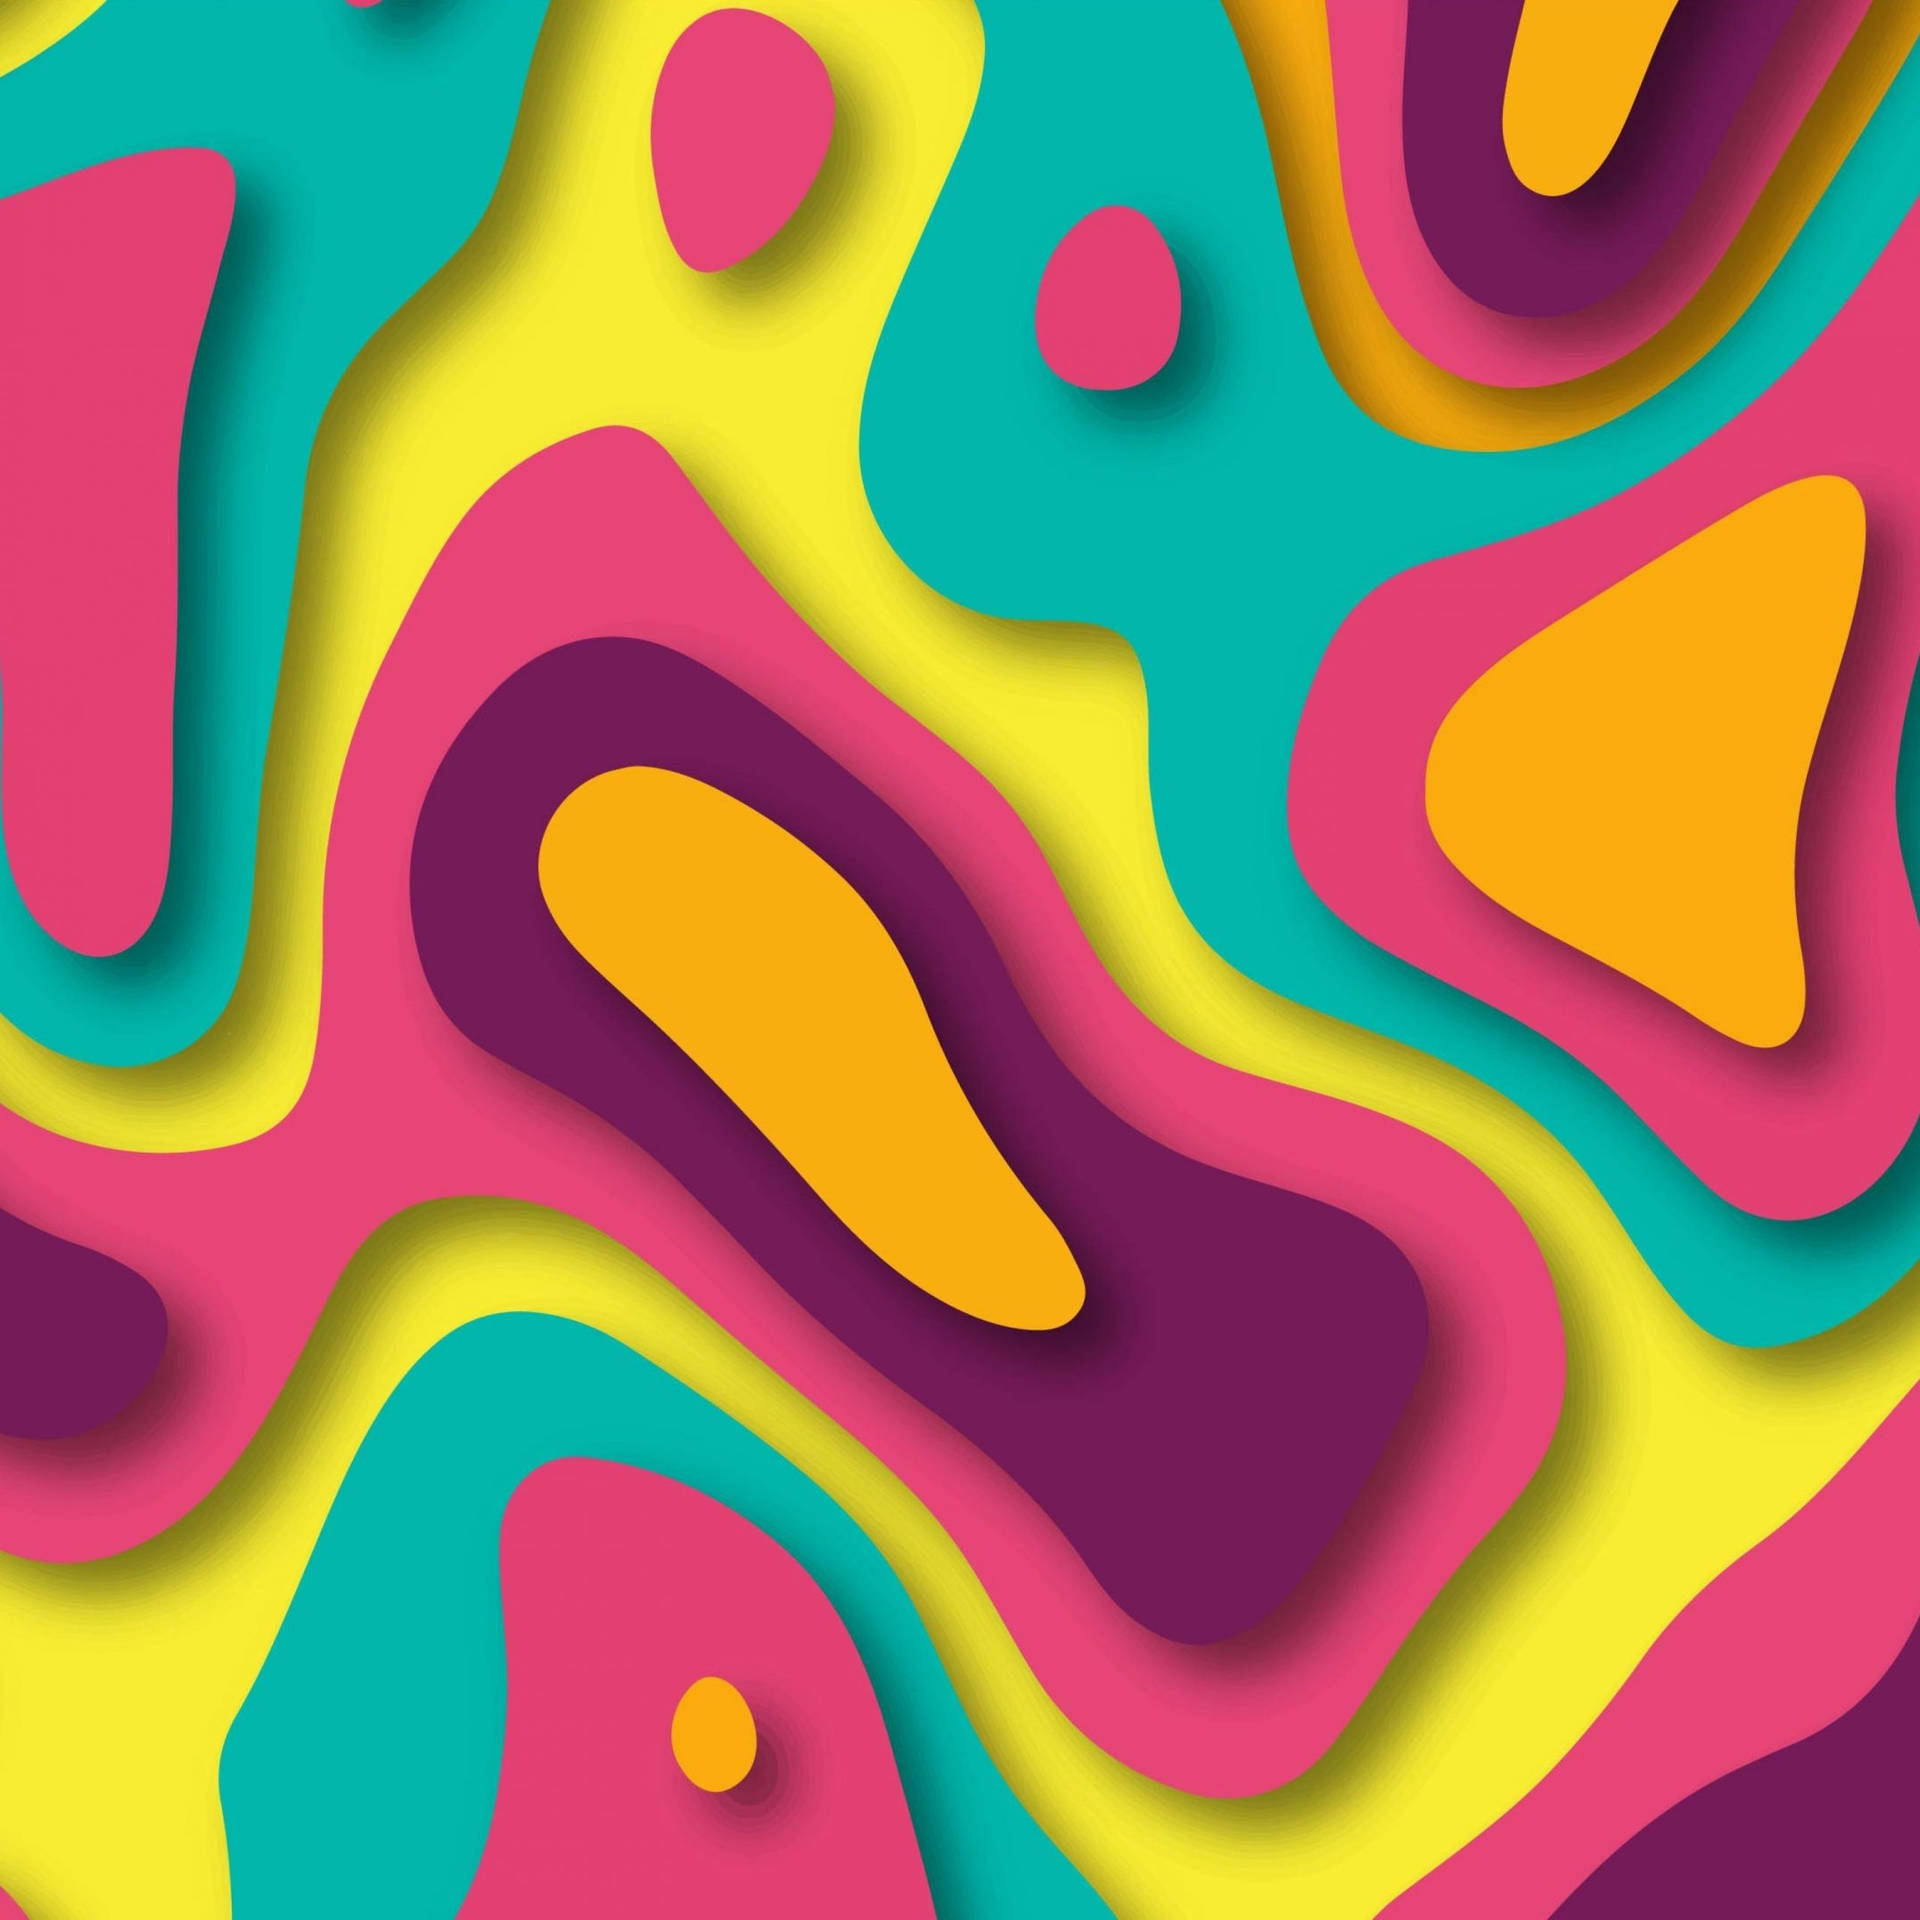 Ipad Pro 12.9 Colorful Shapes Picture